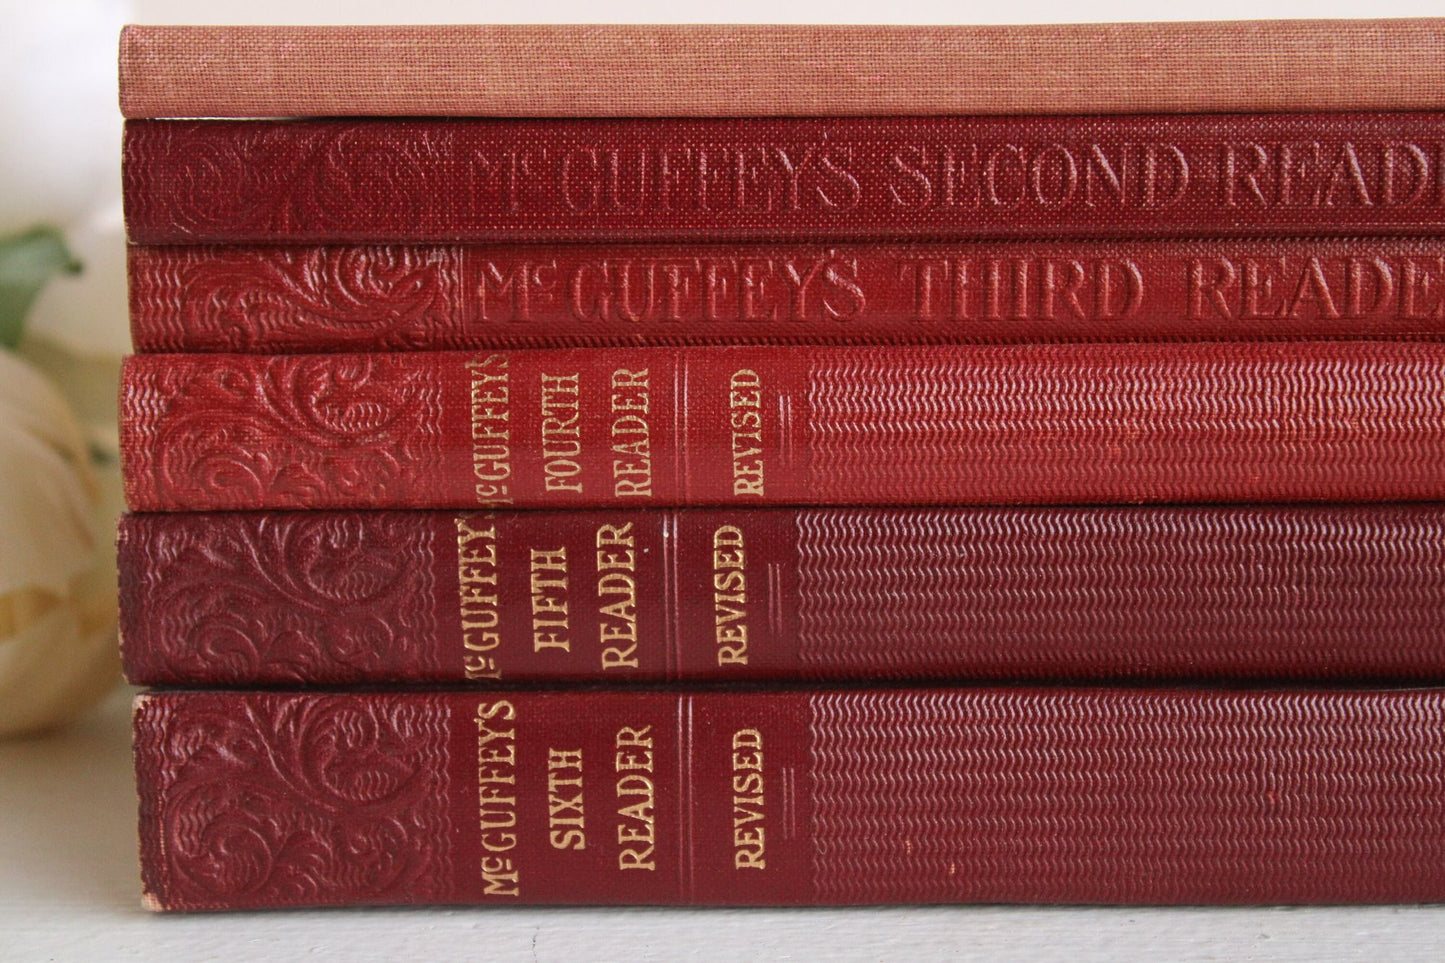 Vintage 1920s McGuffey's Eclectic Reader Books, Revised Editions